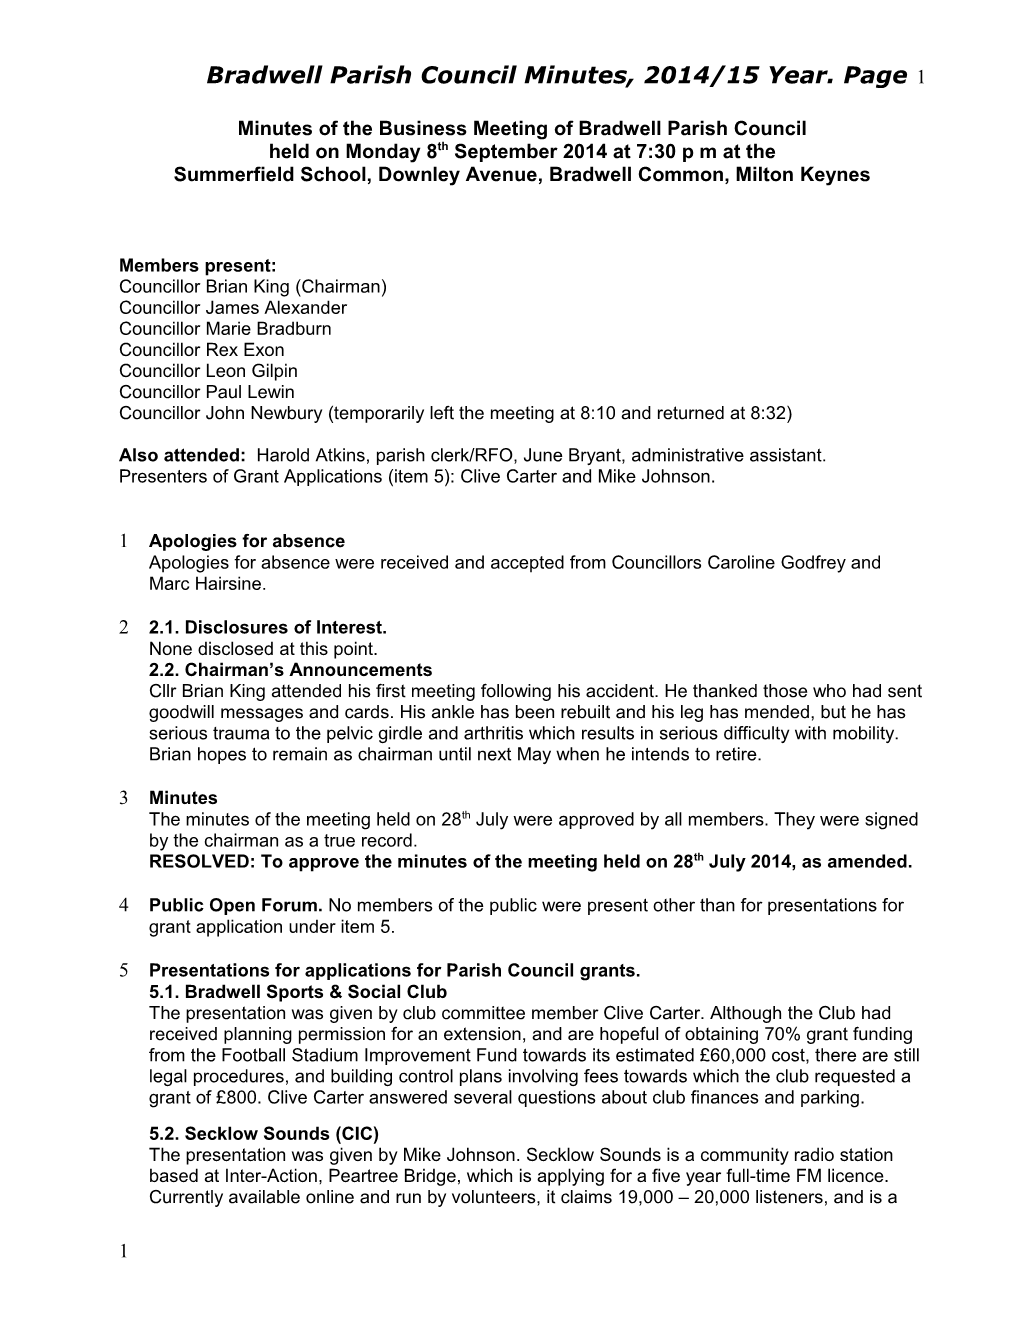 Minutes of the Full Bradwell Parish Council Meeting Held on Monday 16Th April 2007 At s1